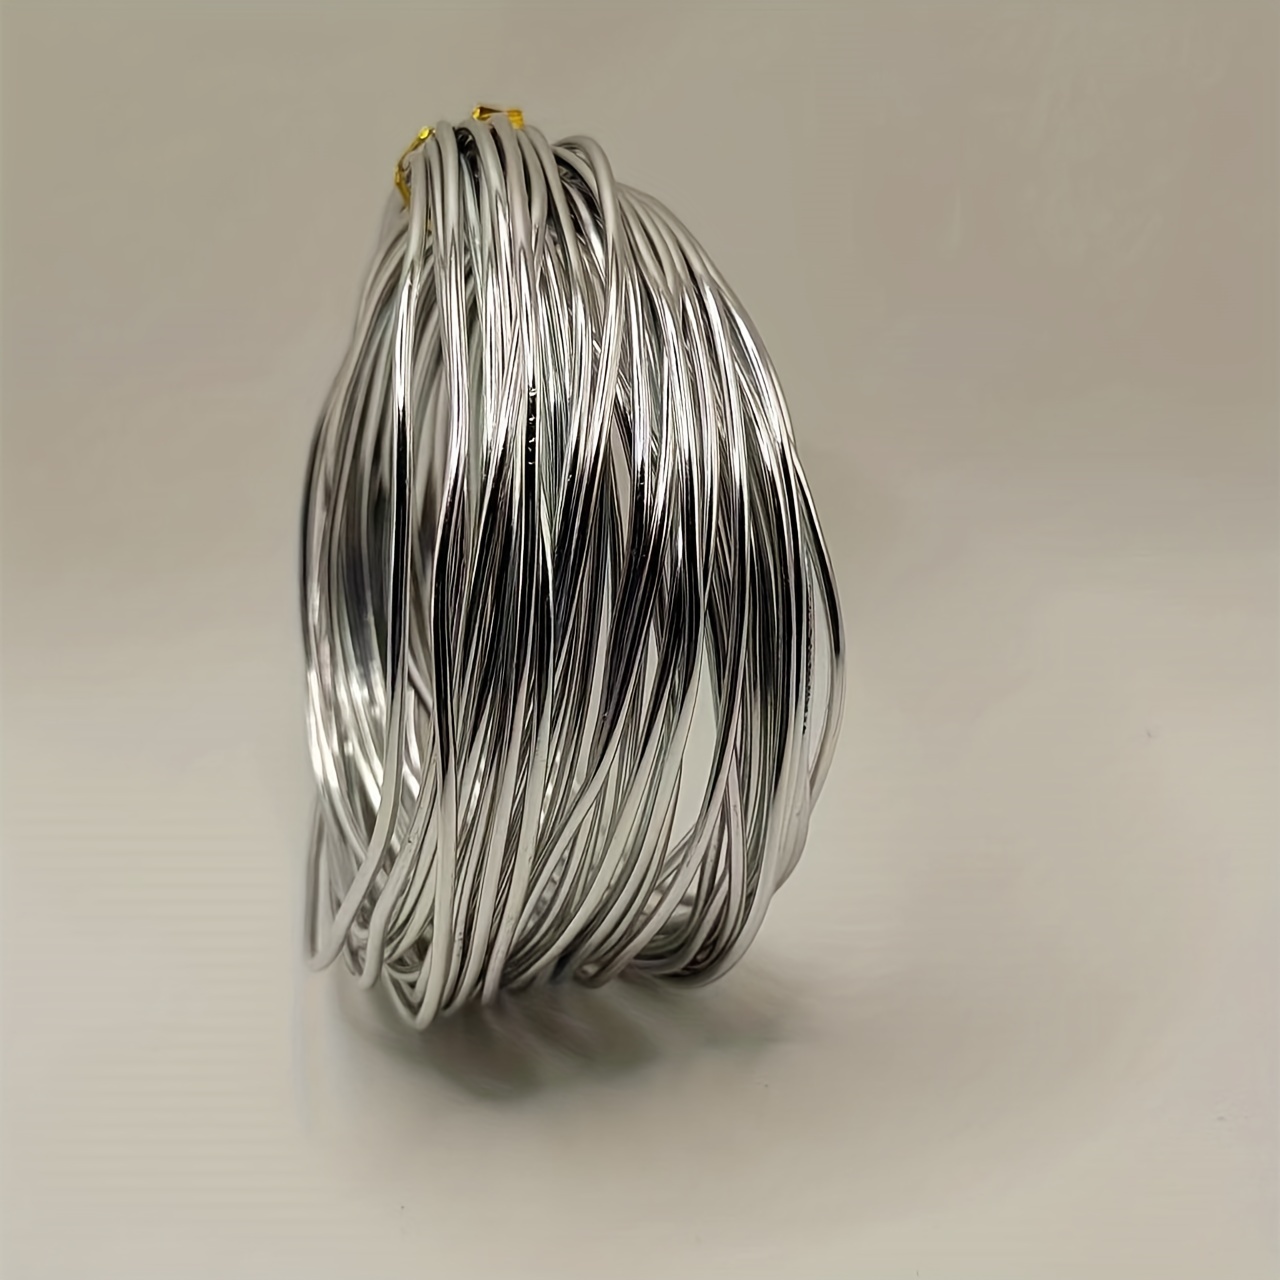 Silver Aluminum Craft Wire, 5 Assorted Sizes (1 mm, 1.5 mm, 2 mm, 2.5 mm  and 3 mm in Thickness) Aluminum Wire Rolls for DIY Sculpture and Crafts,  Each